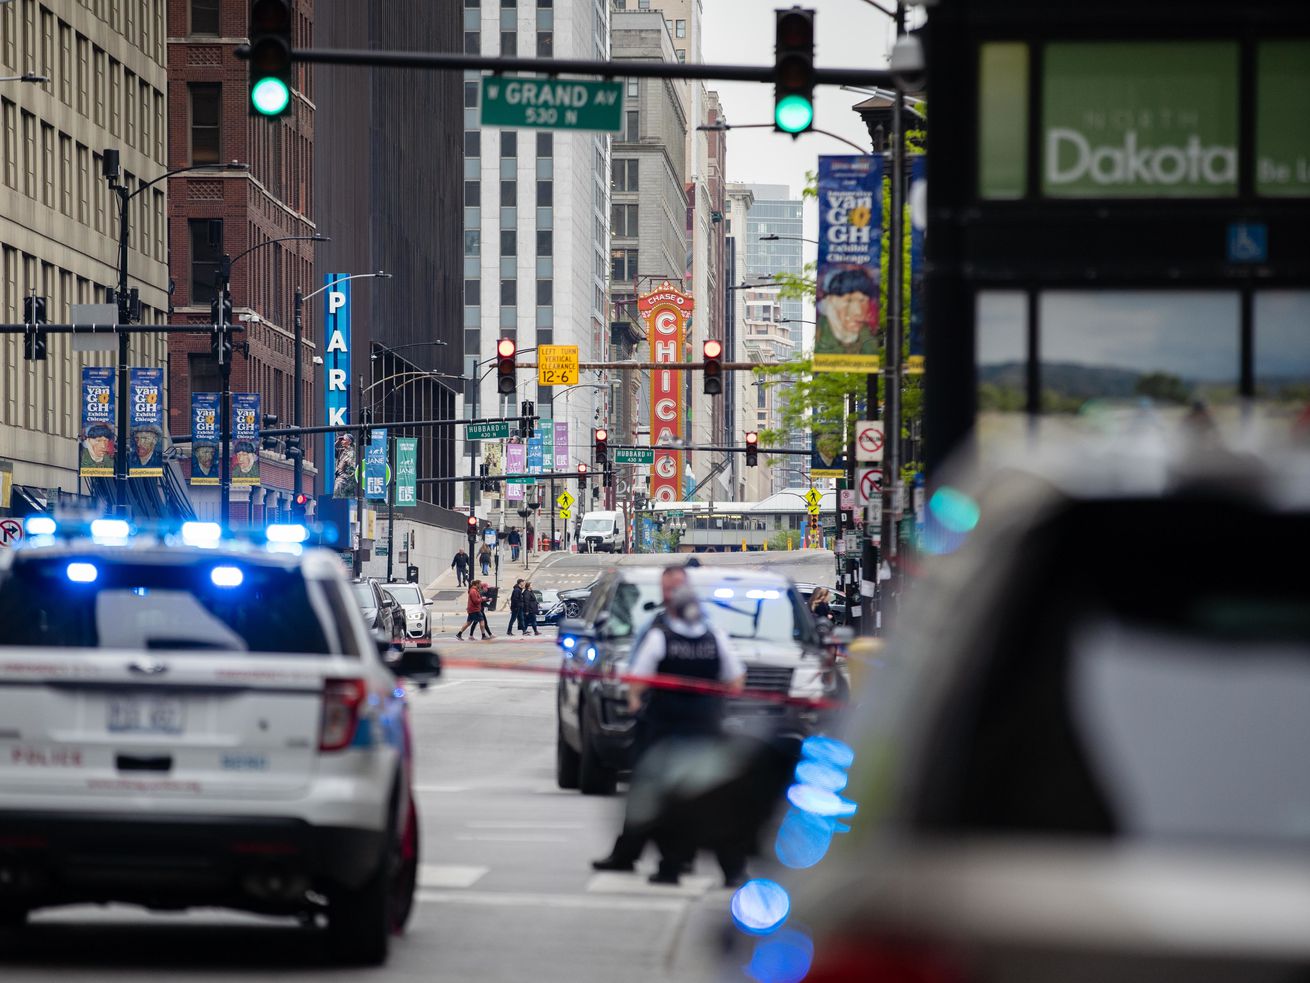 Police cars are parked near West Grand Avenue and North State Street in the River North neighborhood after three people were shot Saturday in a parking garage in the first block of West Grand Avenue, according to Chicago police.